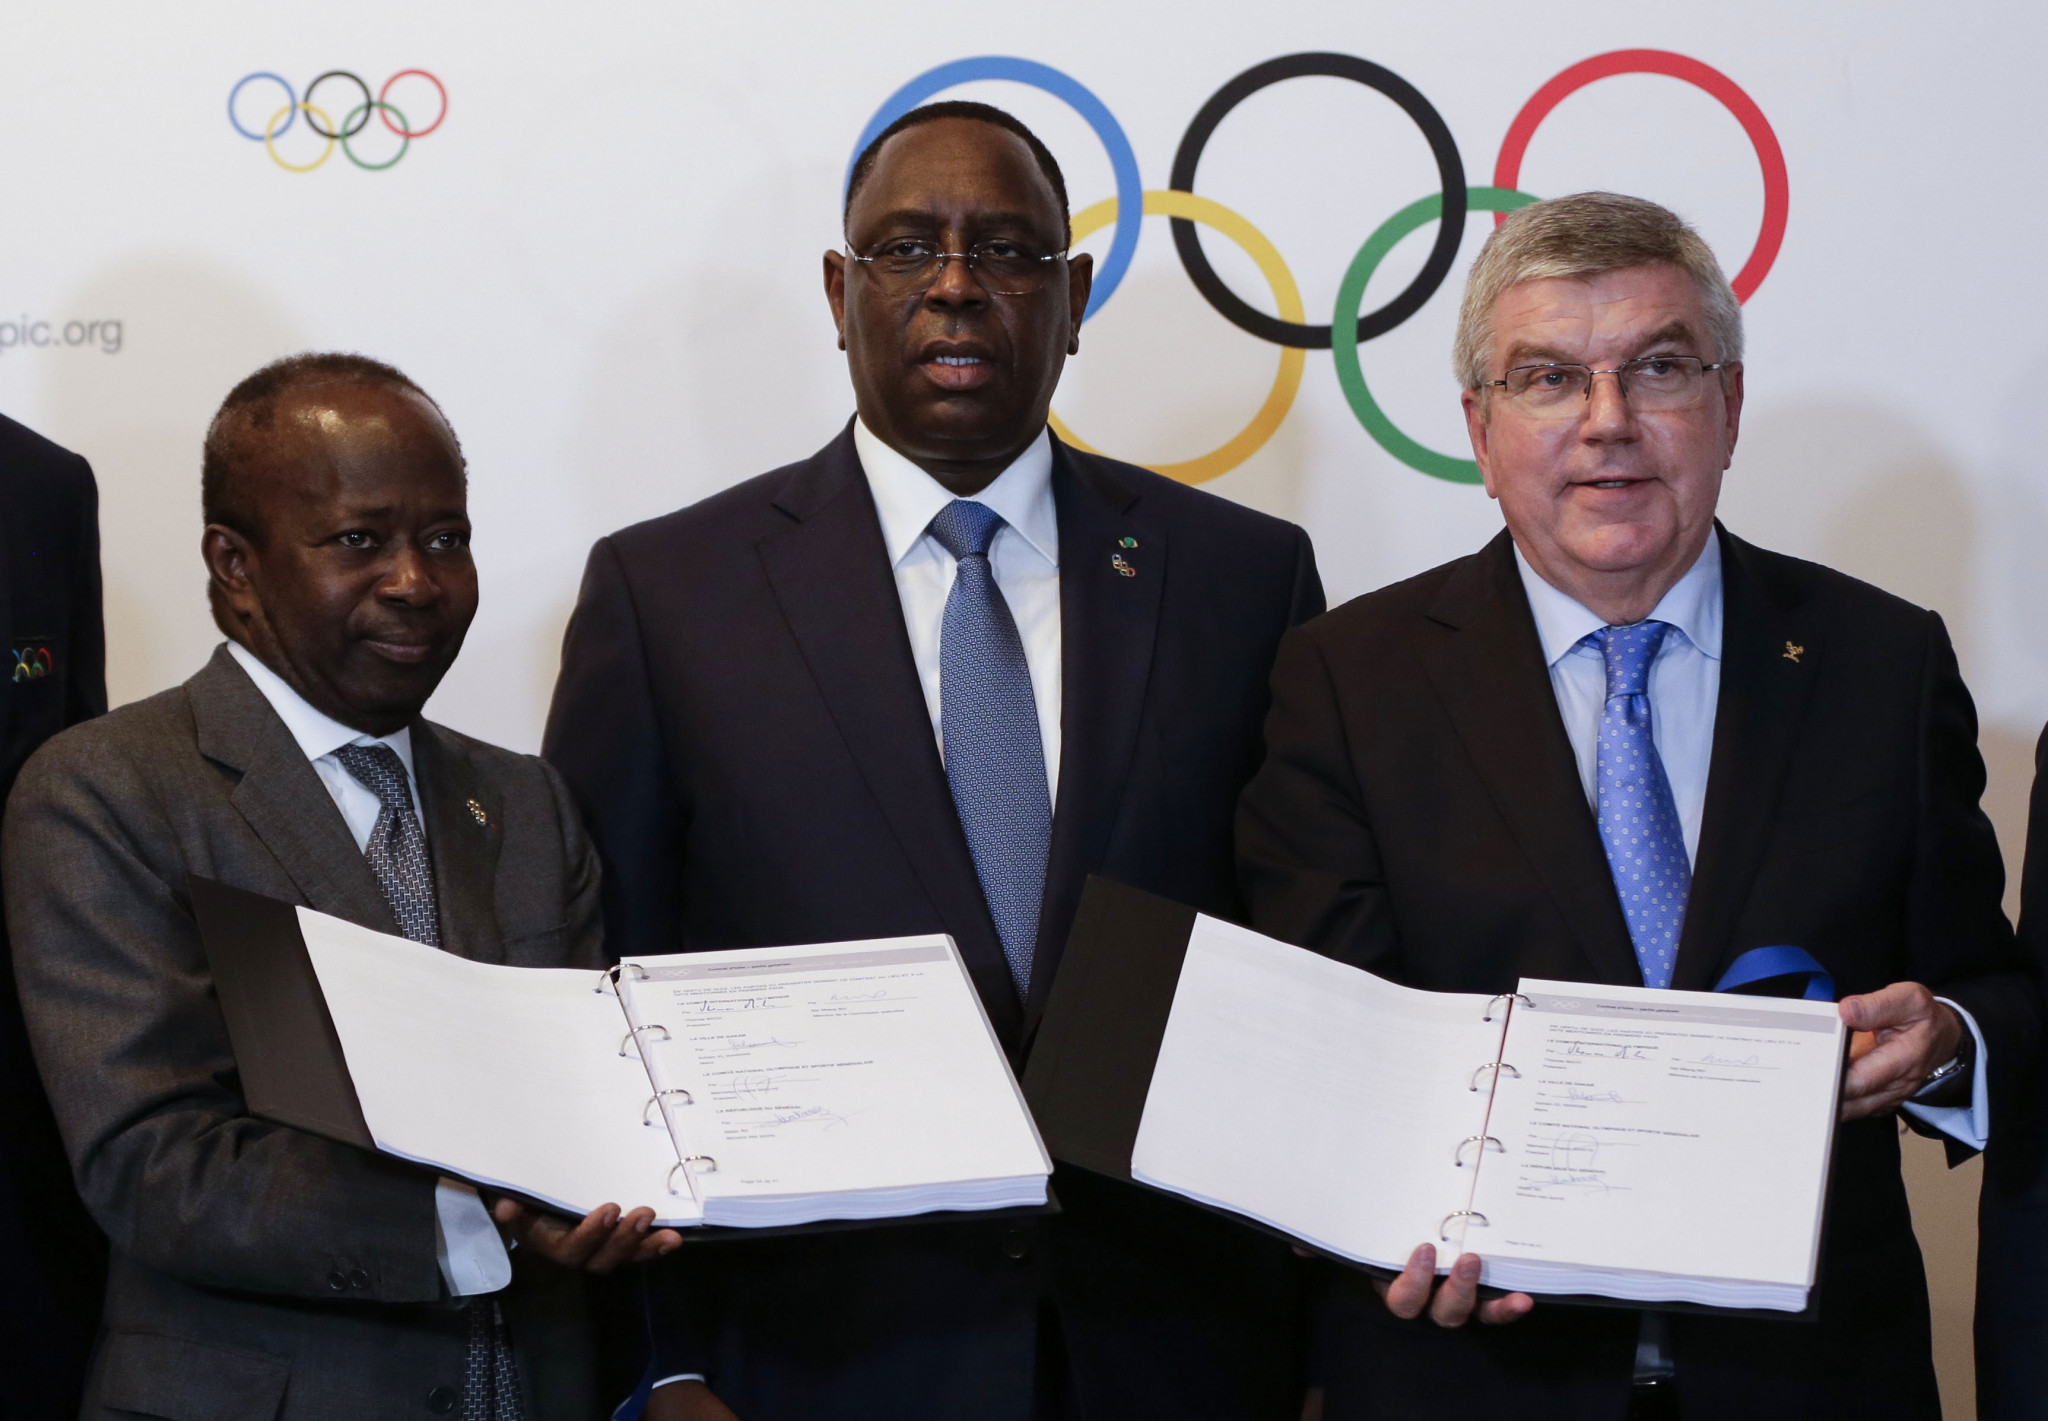 Olympic education is planned in Shantou following the delay to the Dakar 2022 Summer Youth Olympics ©Getty Images